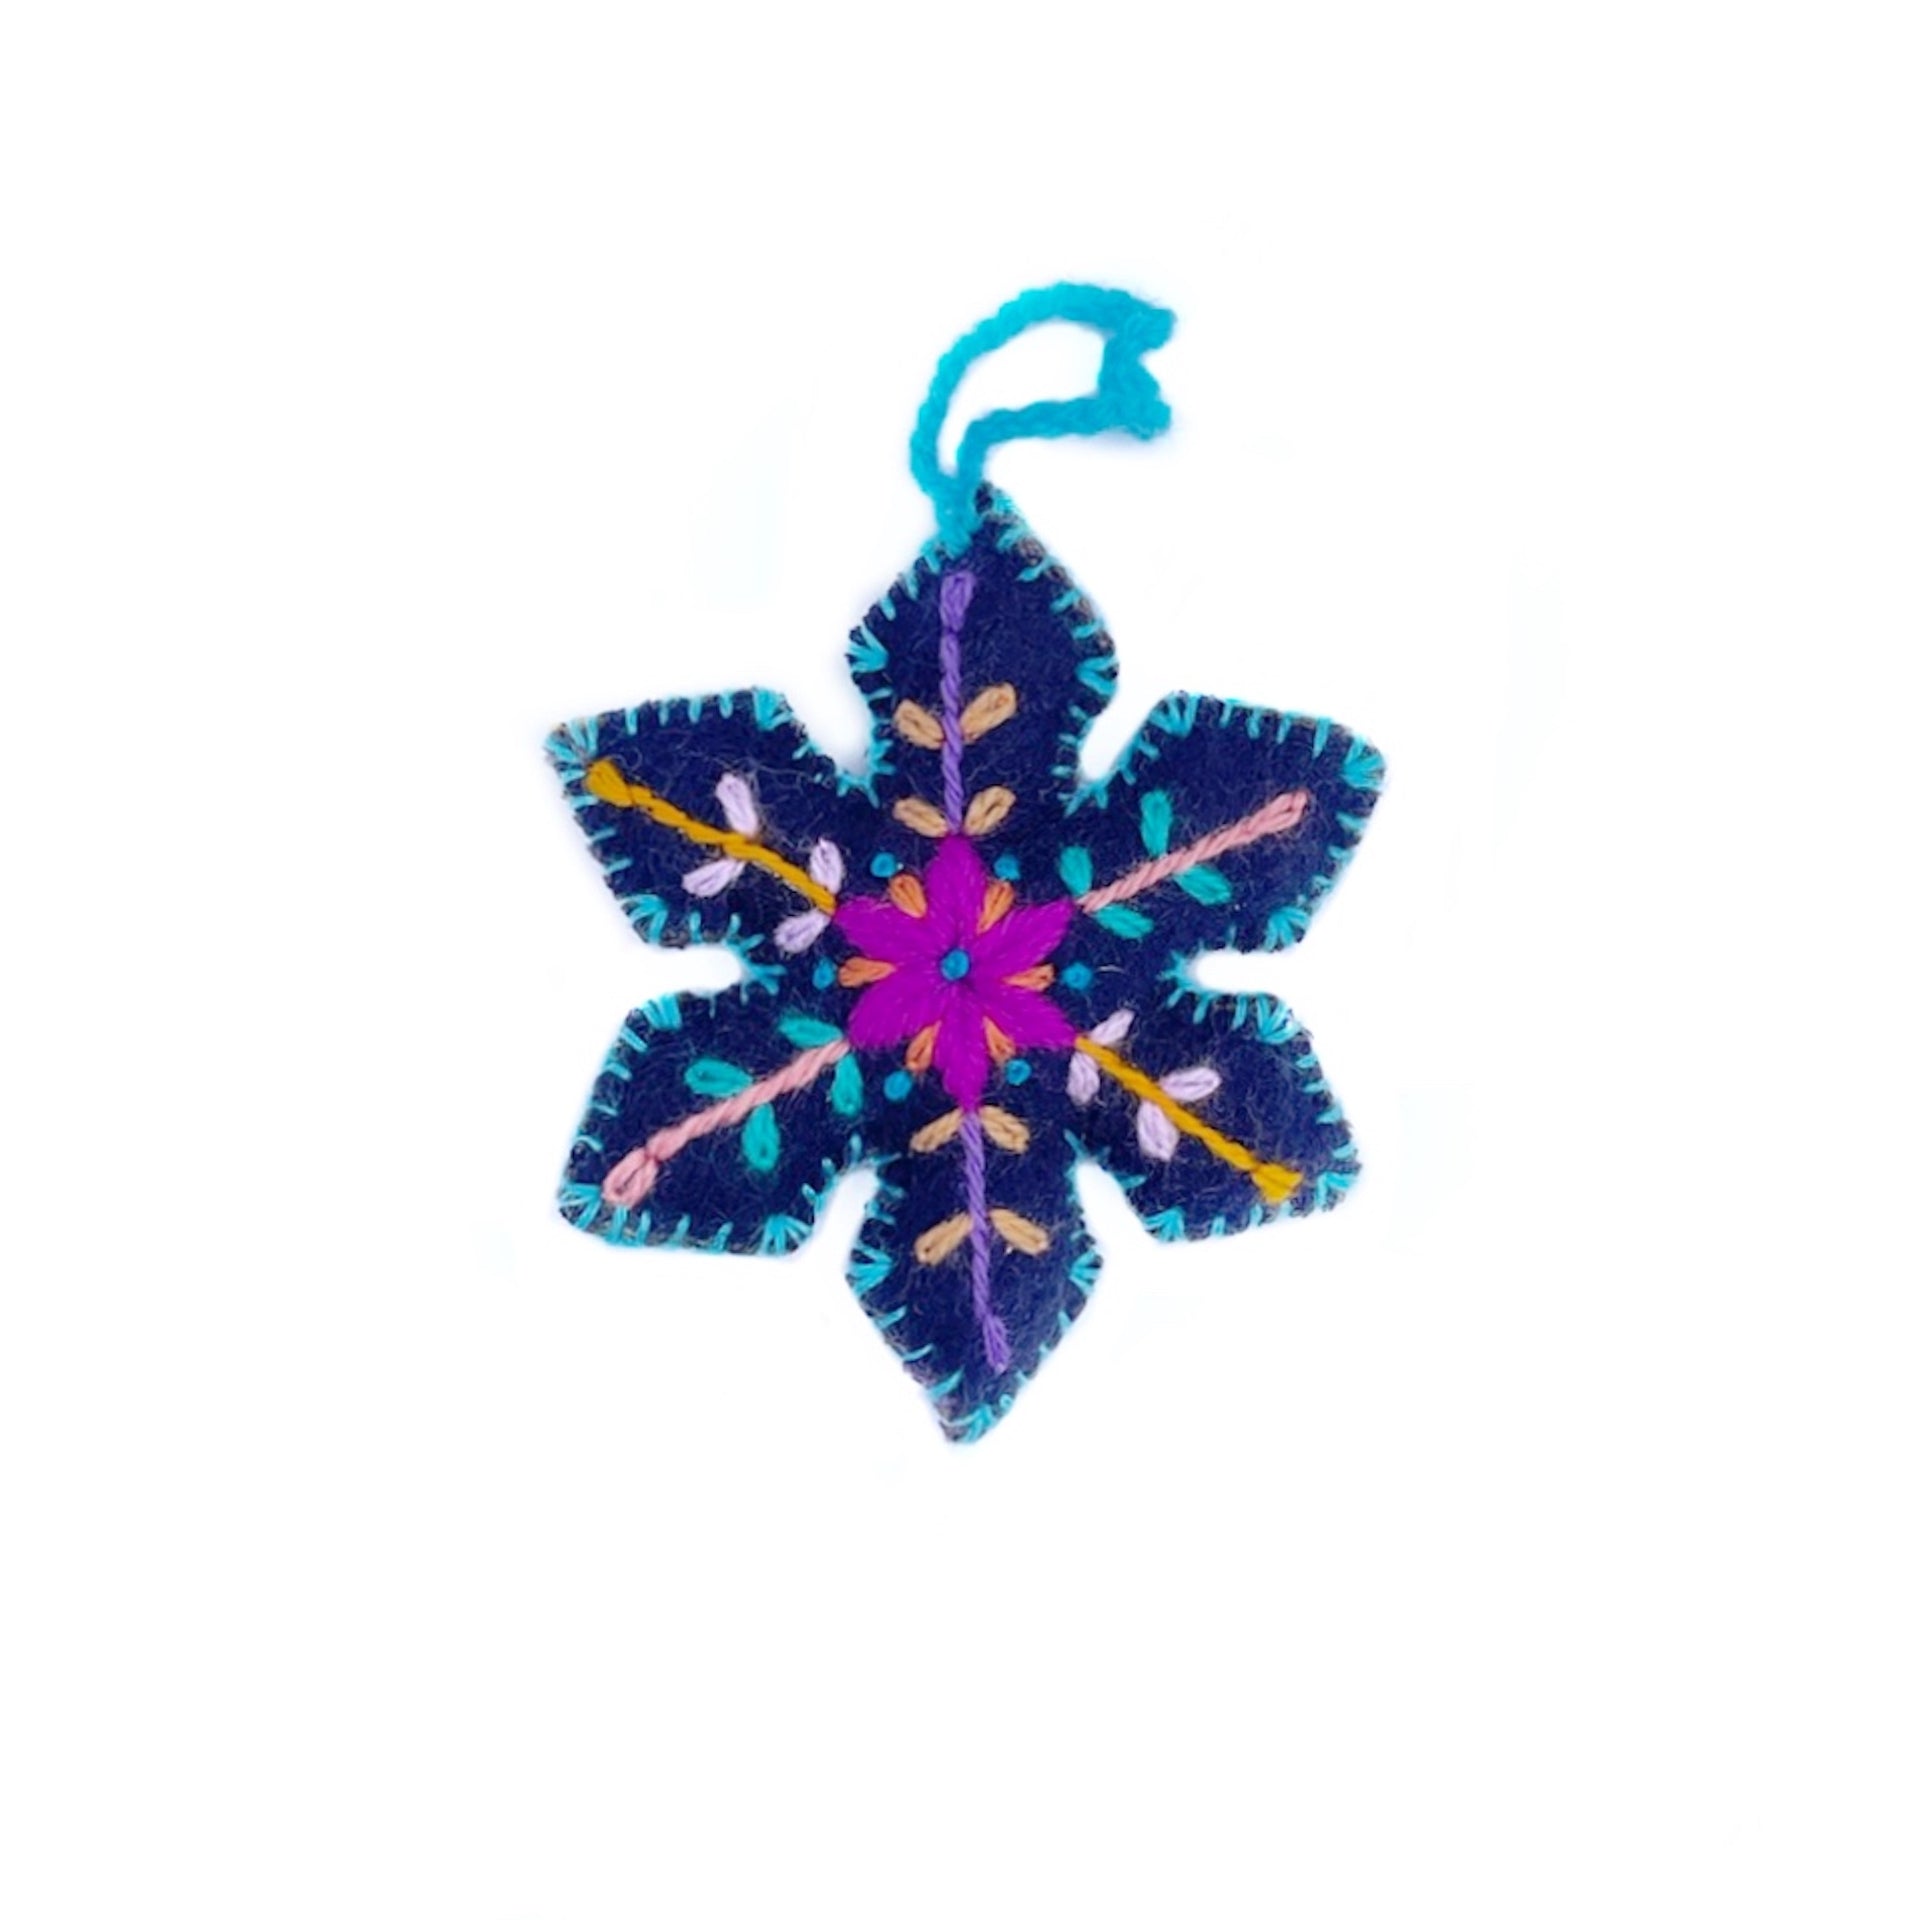 Colorful Snowflake Ornament, Multicolor Embroidered Wool